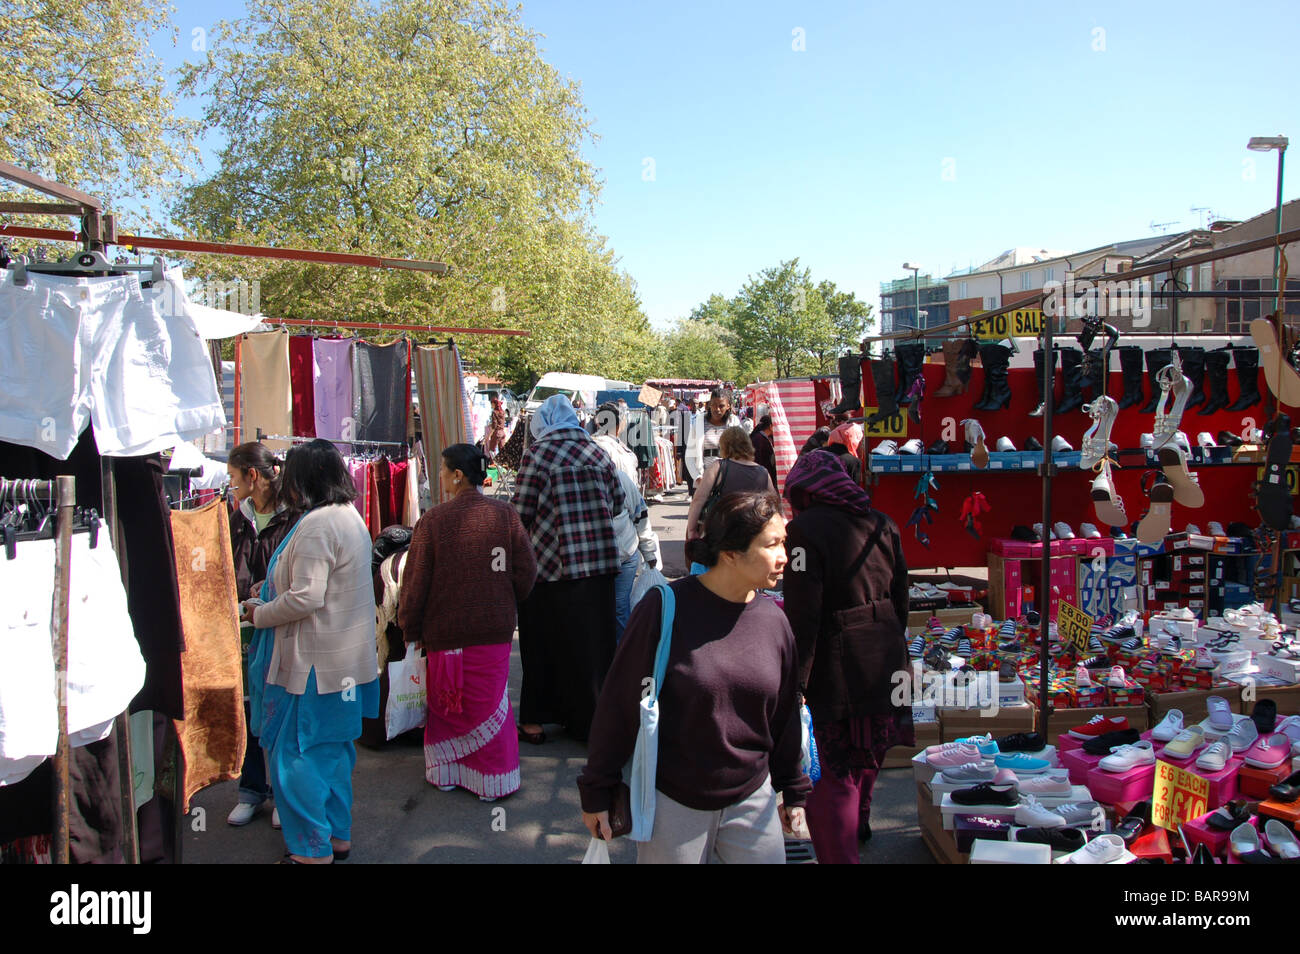 Shoppers at Wednesday's Church road market in Willesden, London, England, Uk Stock Photo